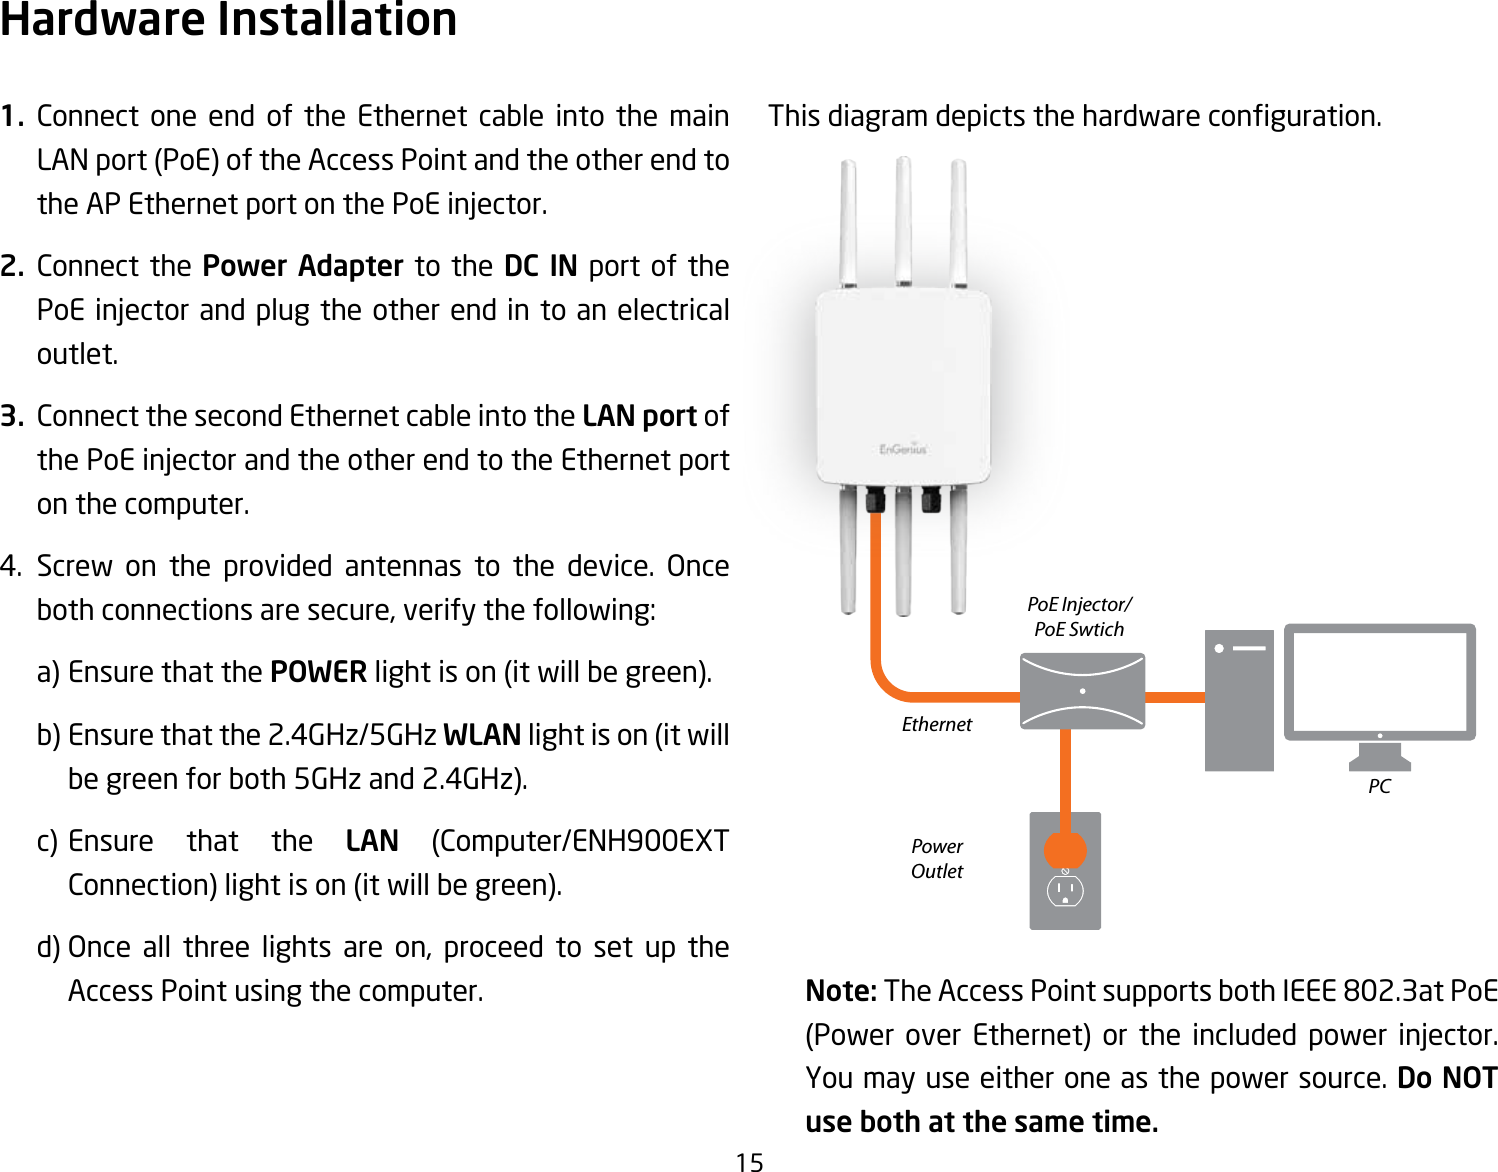 151. Connect one end of the Ethernet cable into the main LAN port (PoE) of the Access Point and the other end to theAPEthernetportonthePoEinjector.2. Connect the Power Adapter to the DC IN port of the PoEinjectorandplugtheotherend in toanelectricaloutlet.3.  Connect the second Ethernet cable into the LAN port of thePoEinjectorandtheotherendtotheEthernetporton the computer.4. Screw on the provided antennas to the device. Onceboth connections are secure, verify the following:    a) Ensure that the POWER light is on (it will be green).    b) Ensure that the 2.4GHz/5GHz WLAN light is on (it will   be green for both 5GHz and 2.4GHz).  c) Ensure that the LAN (Computer/ENH900EXT    Connection) light is on (it will be green).  d)Once all three lights are on, proceed to set up the   Access Point using the computer.Thisdiagramdepictsthehardwareconguration.Note: TheAccessPointsupportsbothIEEE802.3atPoE(Power over Ethernet) or the included power injector.You may use either one as the power source. Do NOT use both at the same time.Hardware InstallationEthernetPCPowerOutletPoE Injector/PoE Swtich